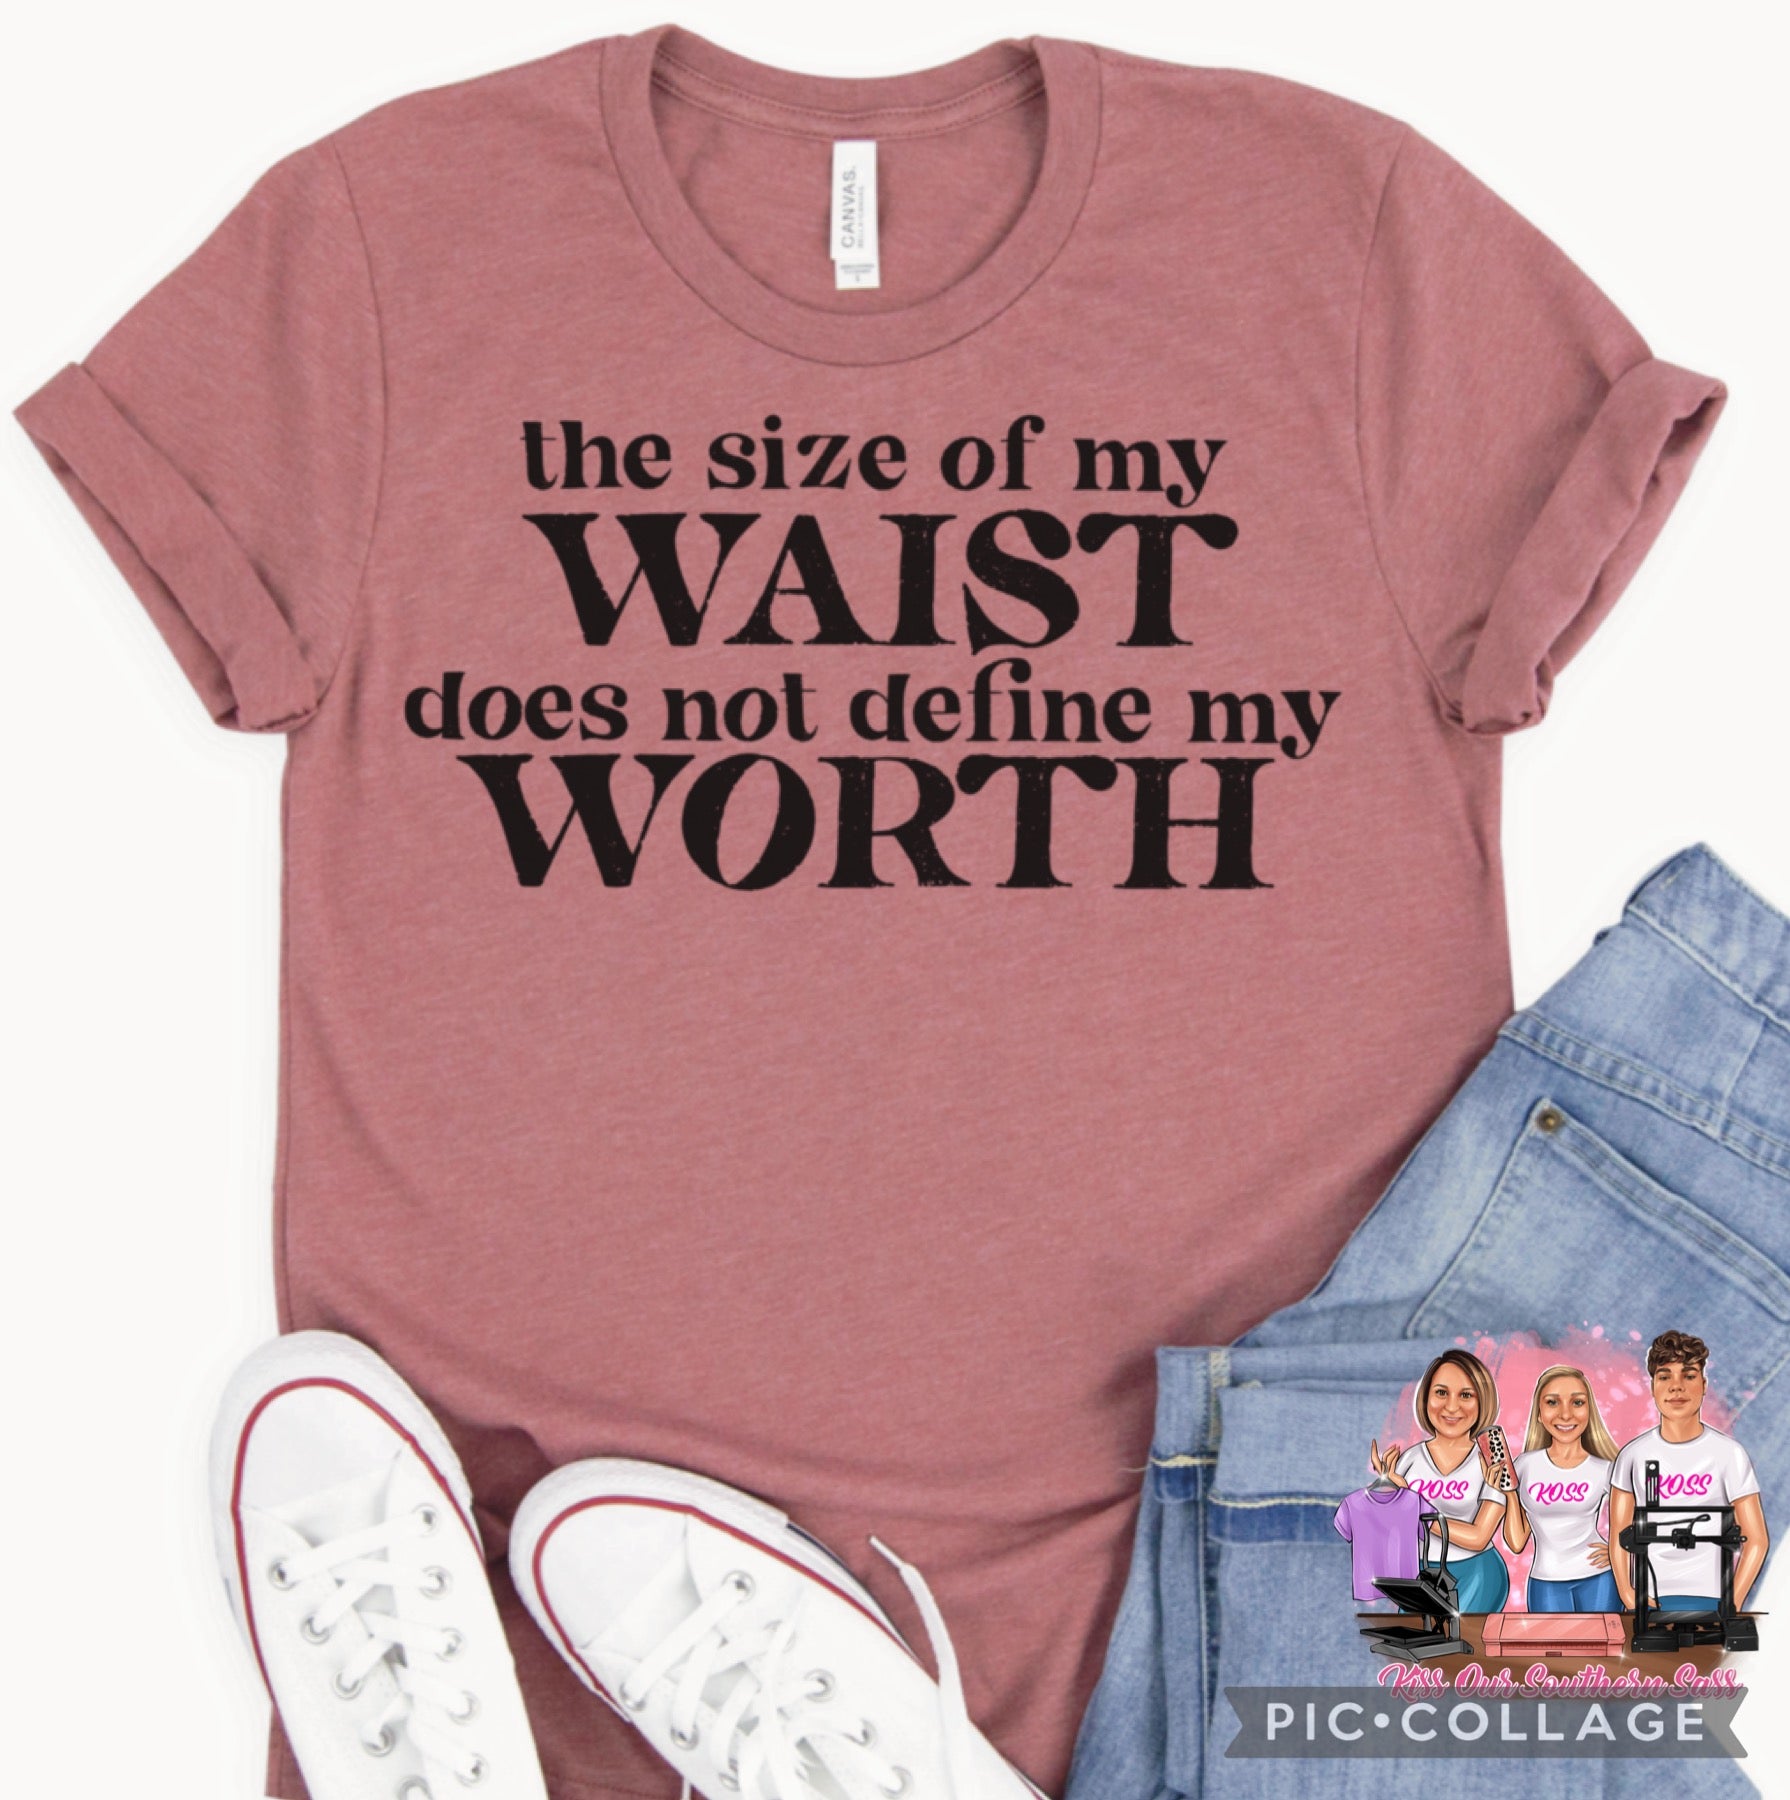 The size of my waist does not define my worth